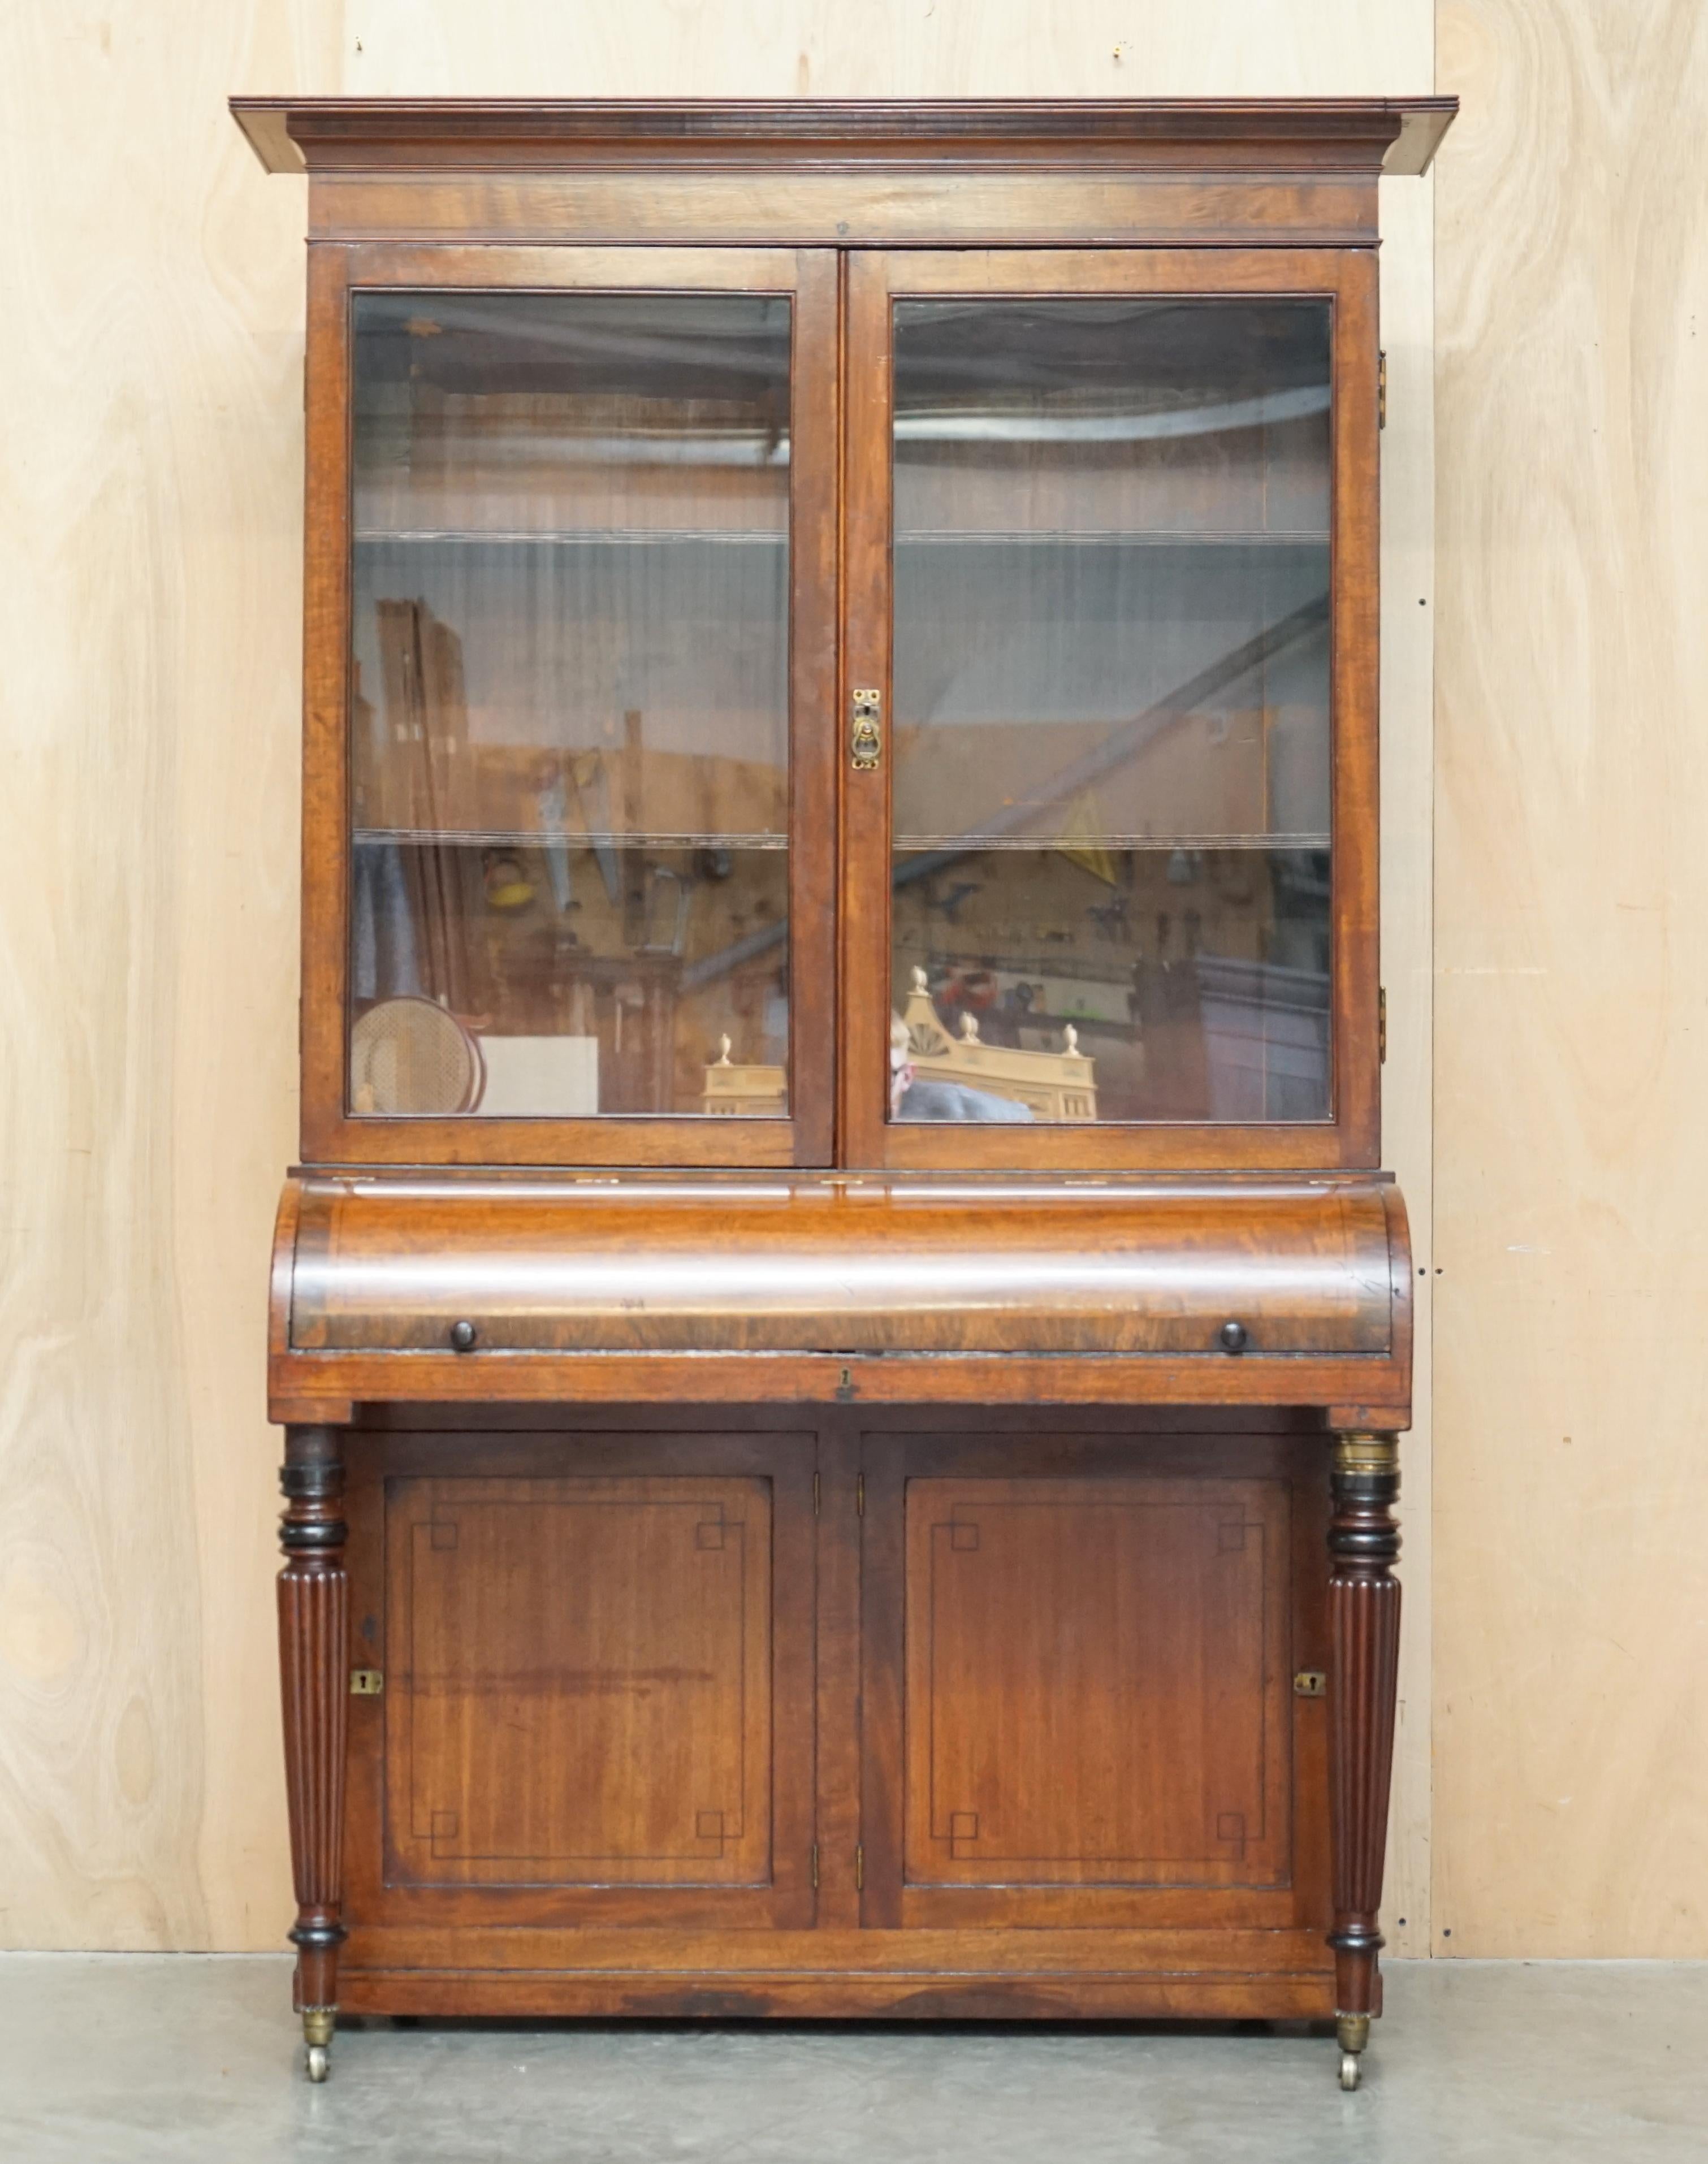 Royal House Antiques

Royal House Antiques is delighted to offer for sale this absolutely stunning circa 1860-1880 Walnut framed Scriban bureau bookcase 

Please note the delivery fee listed is just a guide, it covers within the M25 only for the UK